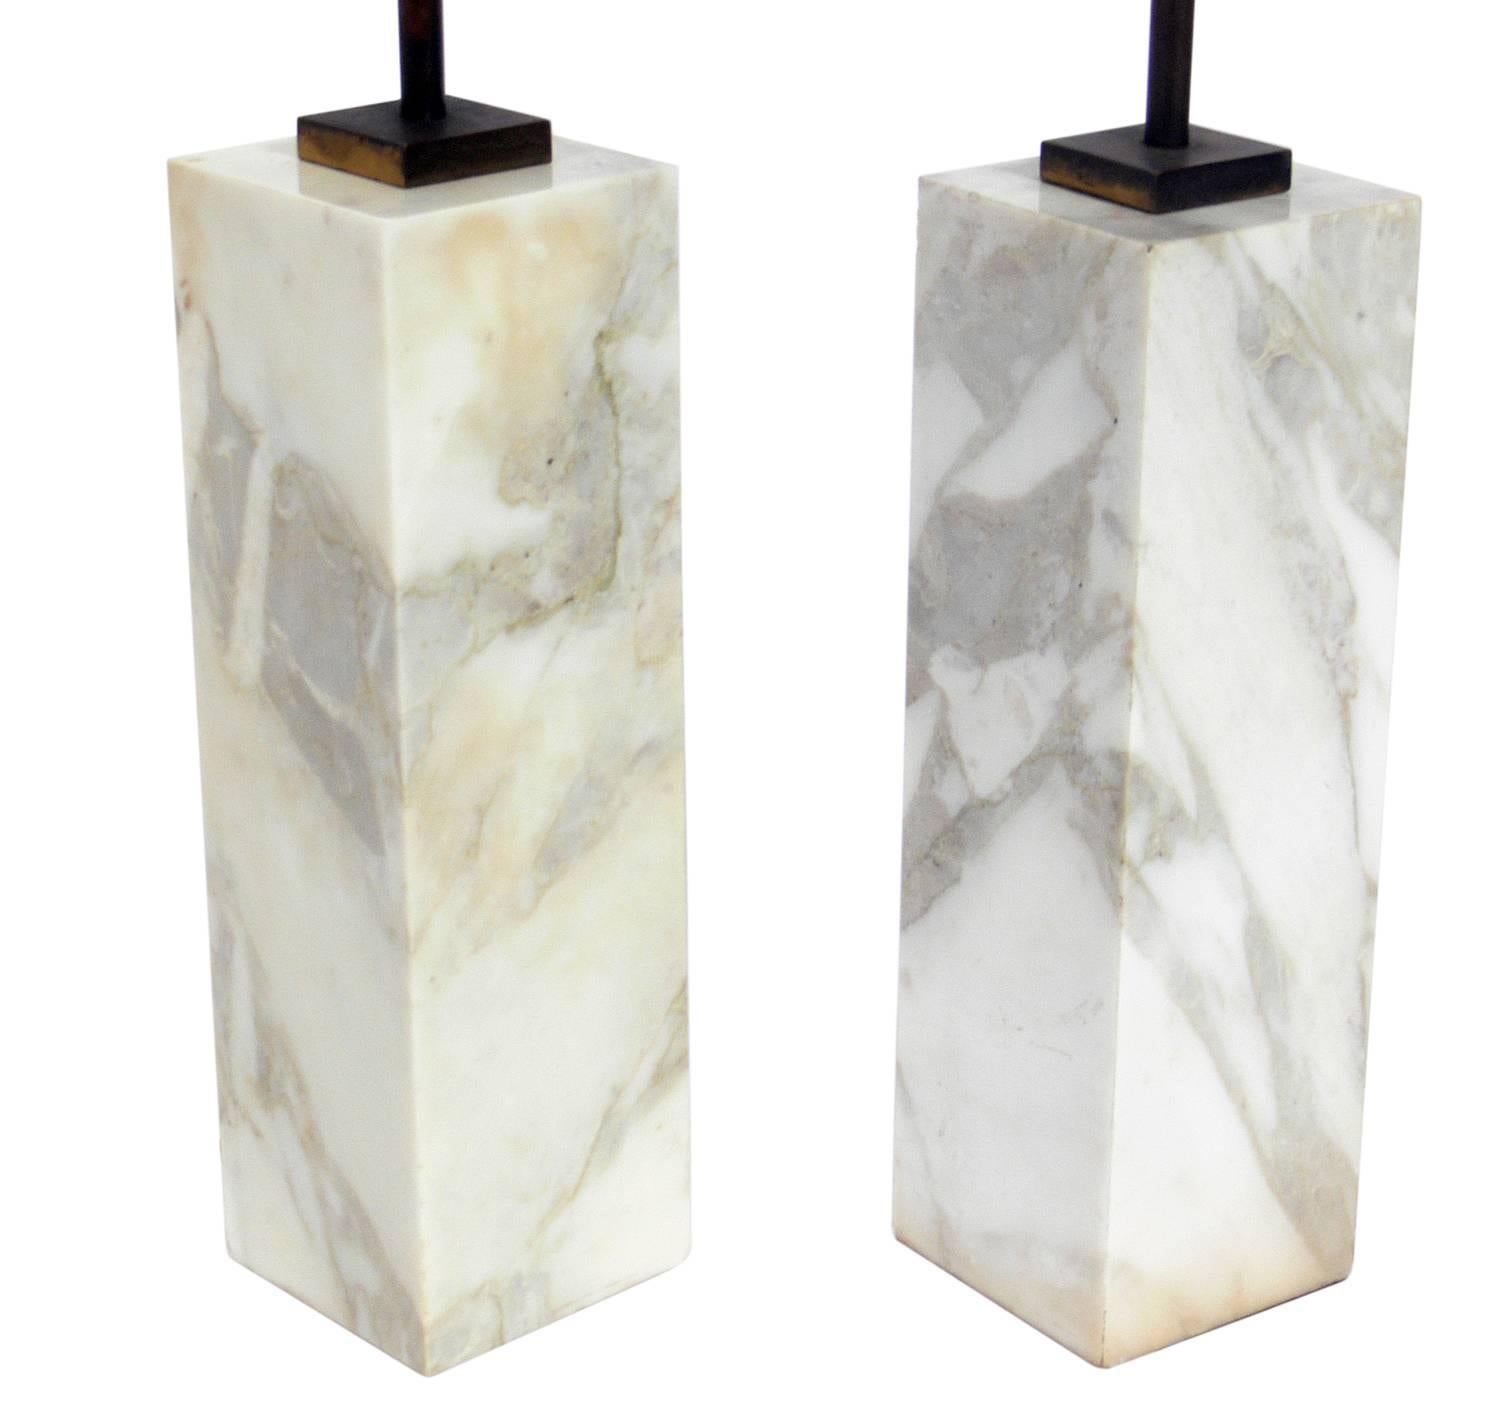 Pair of marble lamps, designed by T.H. Robsjohn Gibbings for Hansen, American, circa 1950s. They are an ivory color marble with light grey and tan veining and the brass fittings retain their original patina. They have been rewired and are ready to